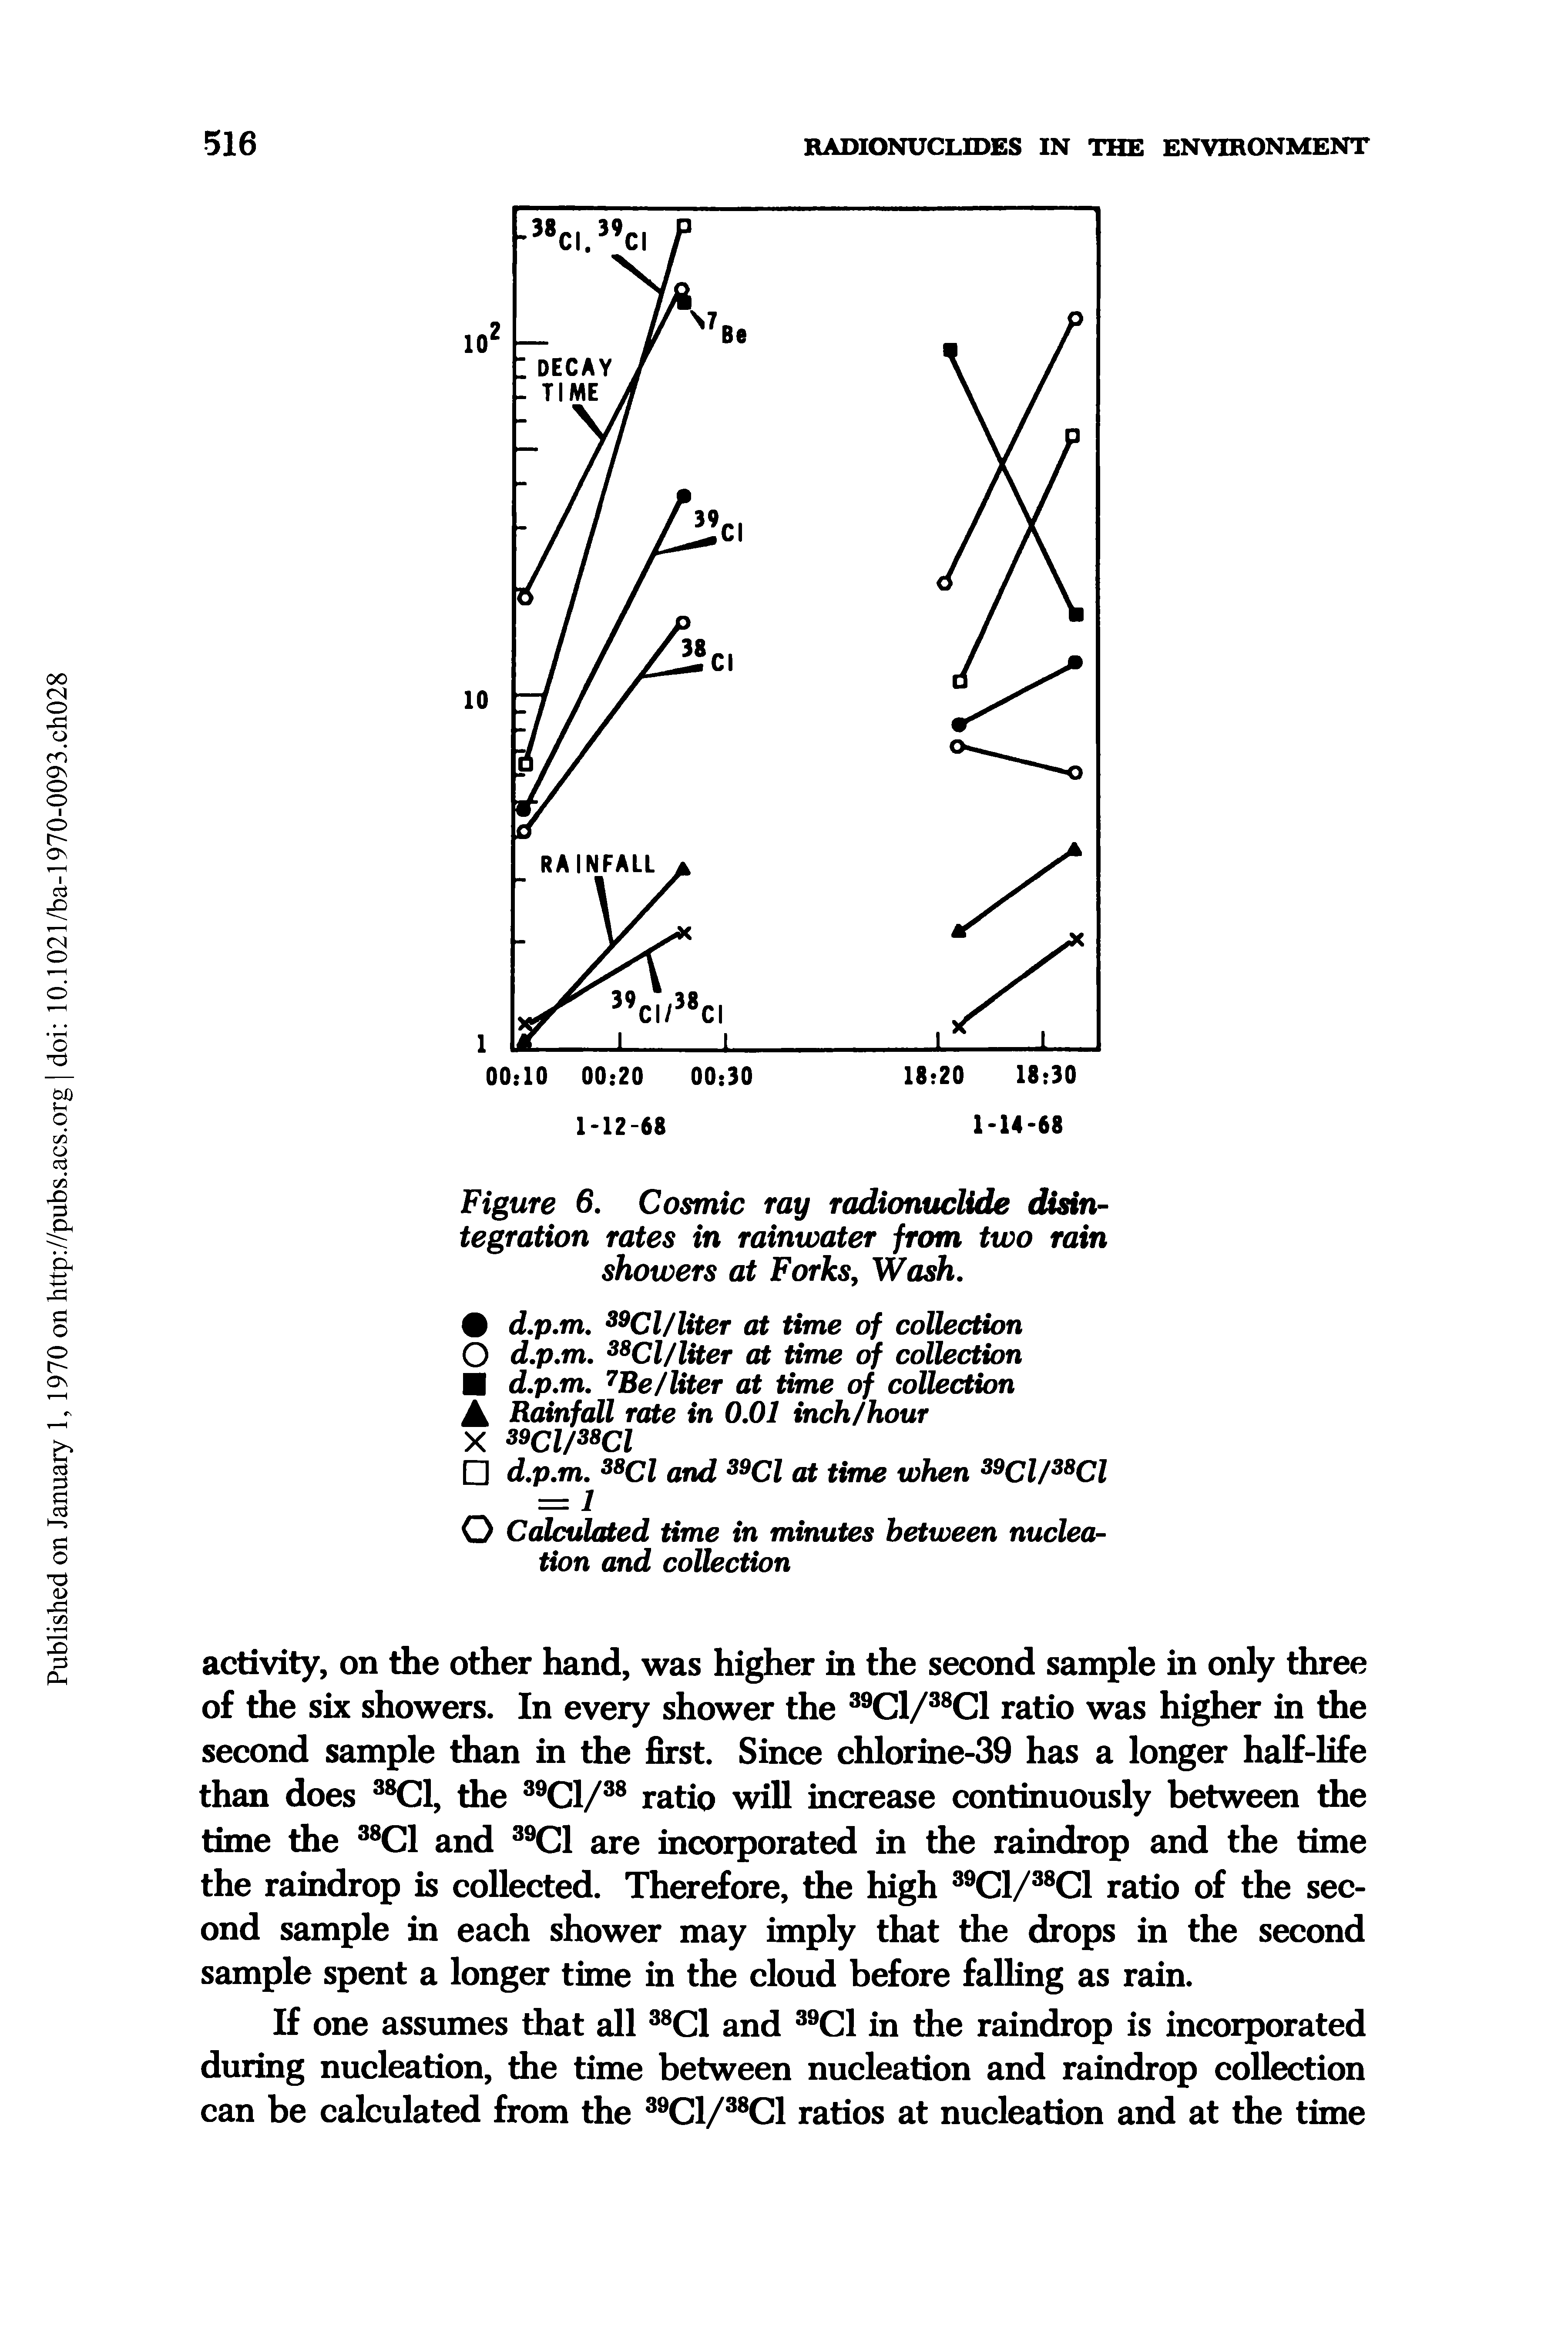 Figure 6. Cosmic ray radionuclide disintegration rates in rainwater from two rain showers at Forks, Wash.